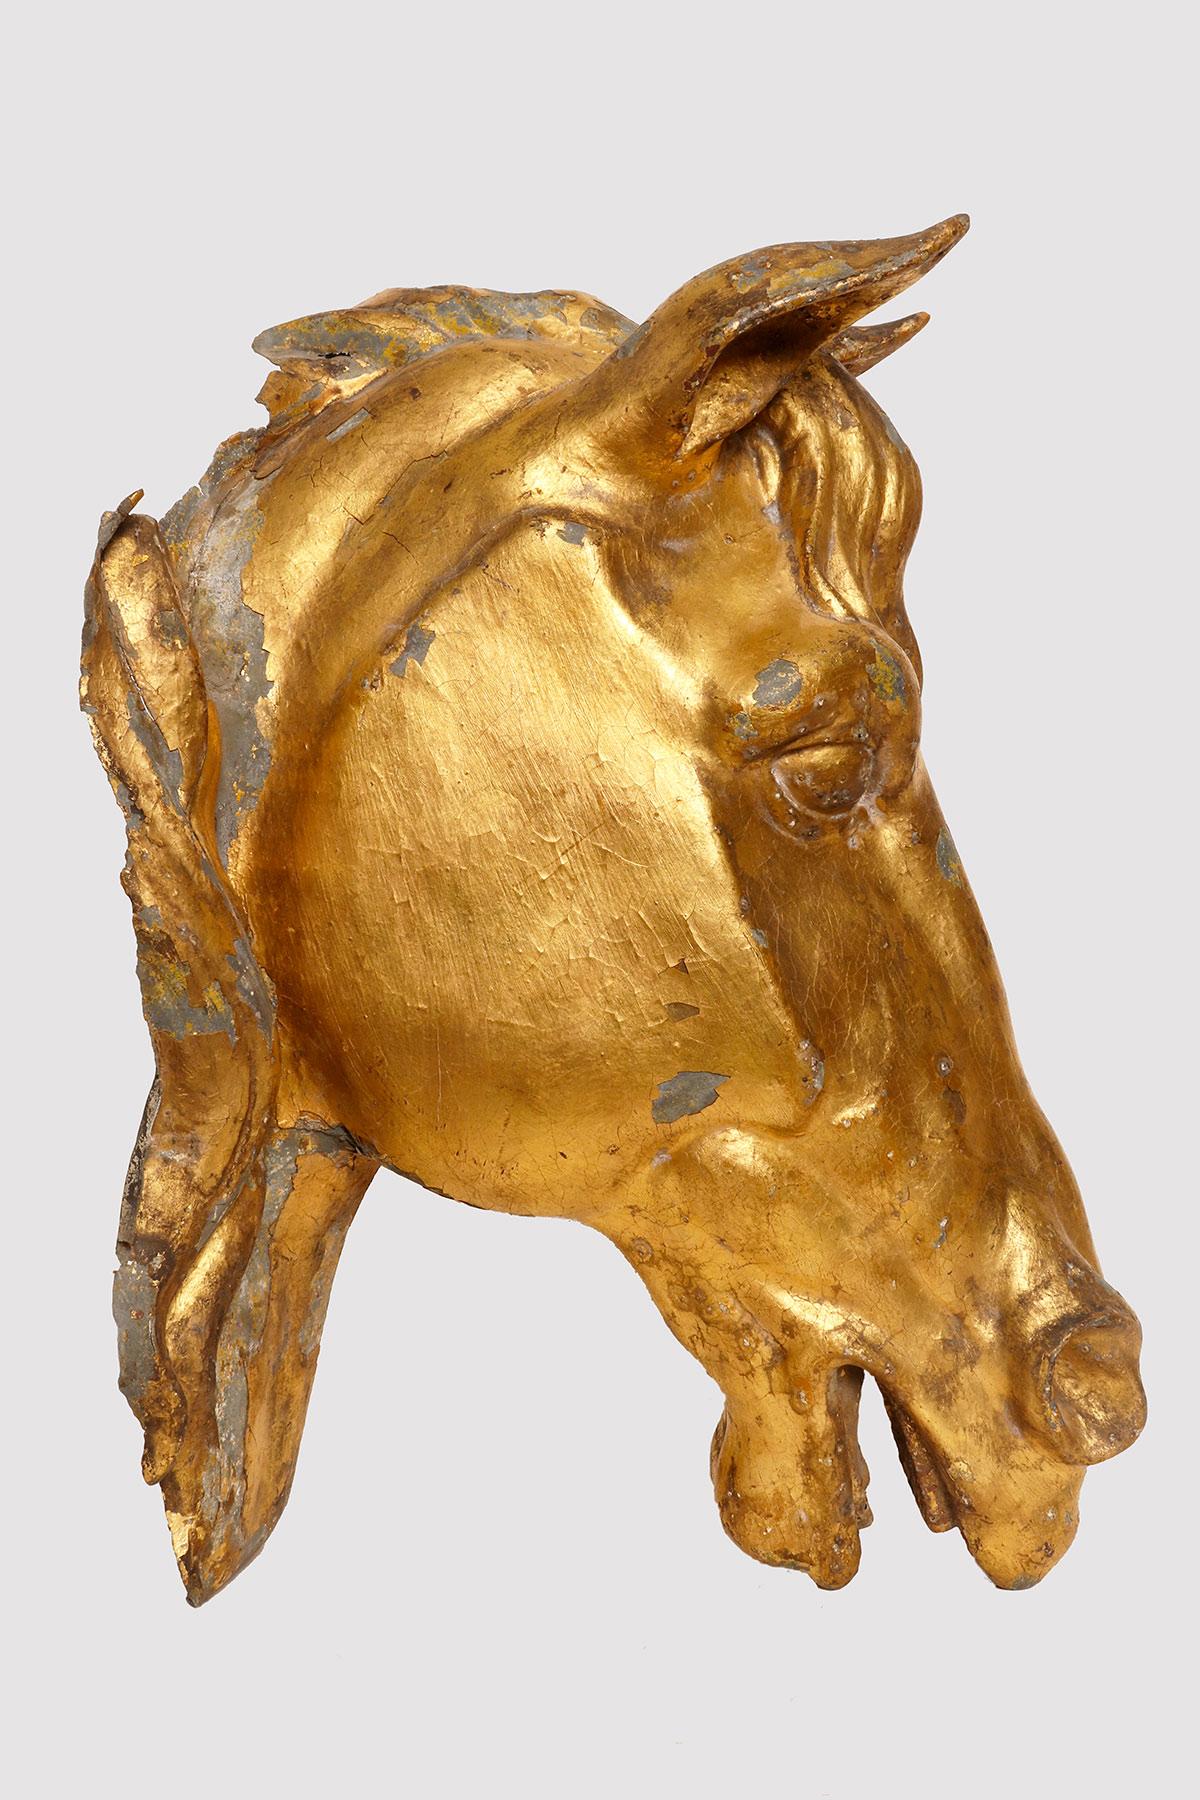 Sculpture in gilded zinc sheet with gold leaf depicting a horse's head. The sculpture is entirely embossed and shows two mane wings. The equine head was a decorative part of an English country house, perhaps better than the stable, at the top of the